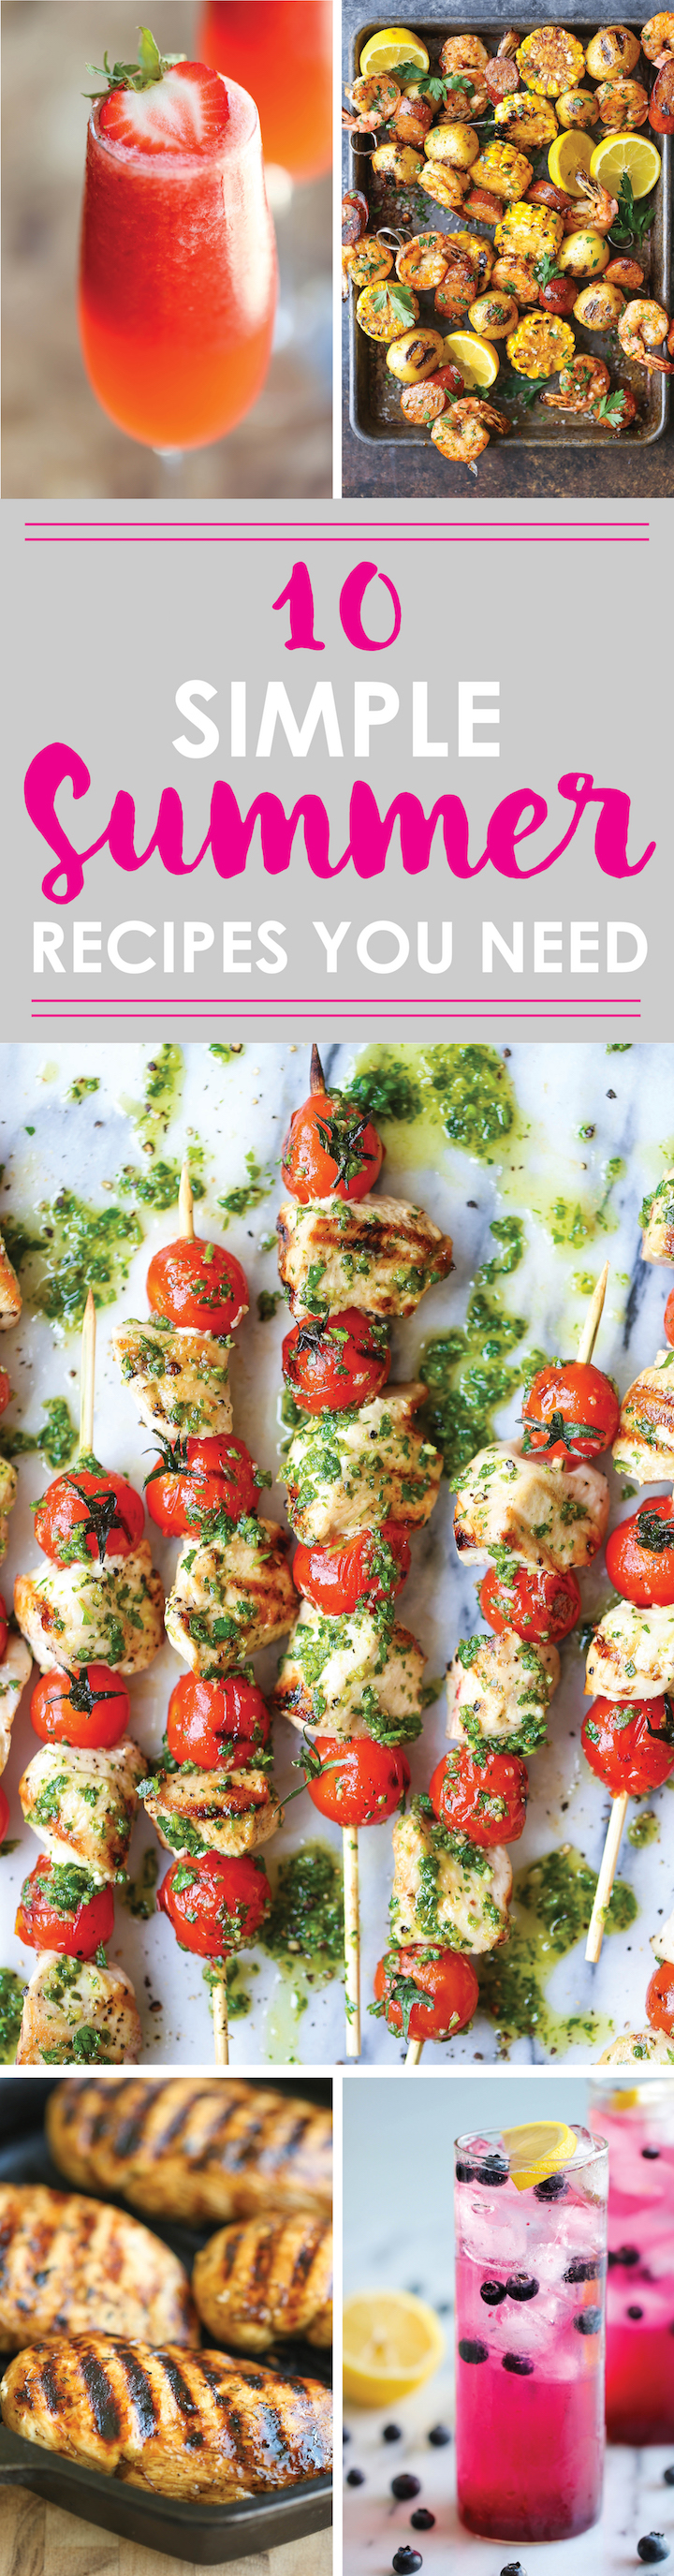 10 Simple Summer Recipes You Need - It's not that perfect summer without chicken pesto kabobs, shrimp boil, blueberry lemonade and so much more!